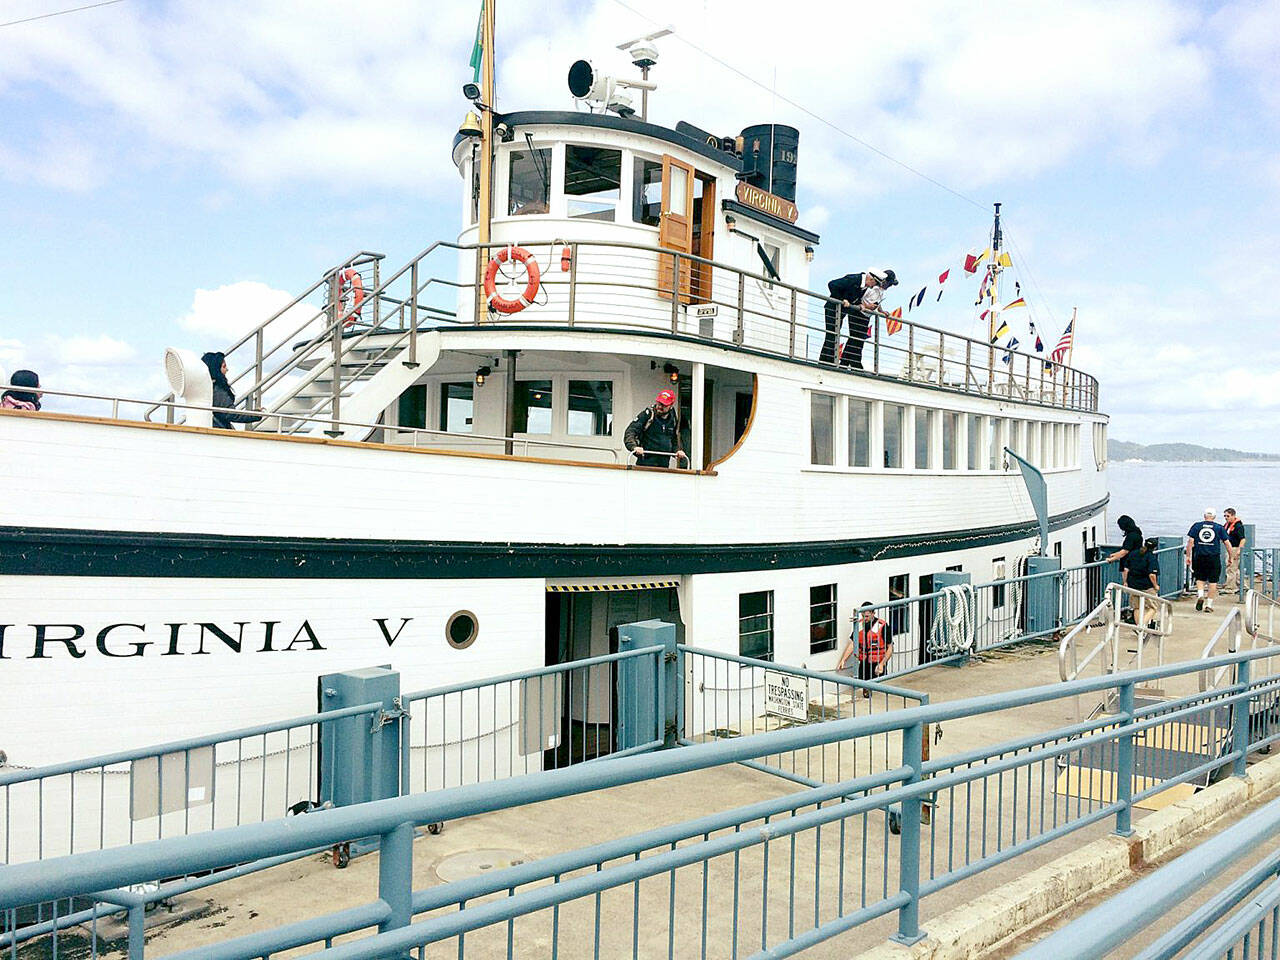 Vashon Heritage Museum Photo
The Virginia V is ready to steam ahead again.